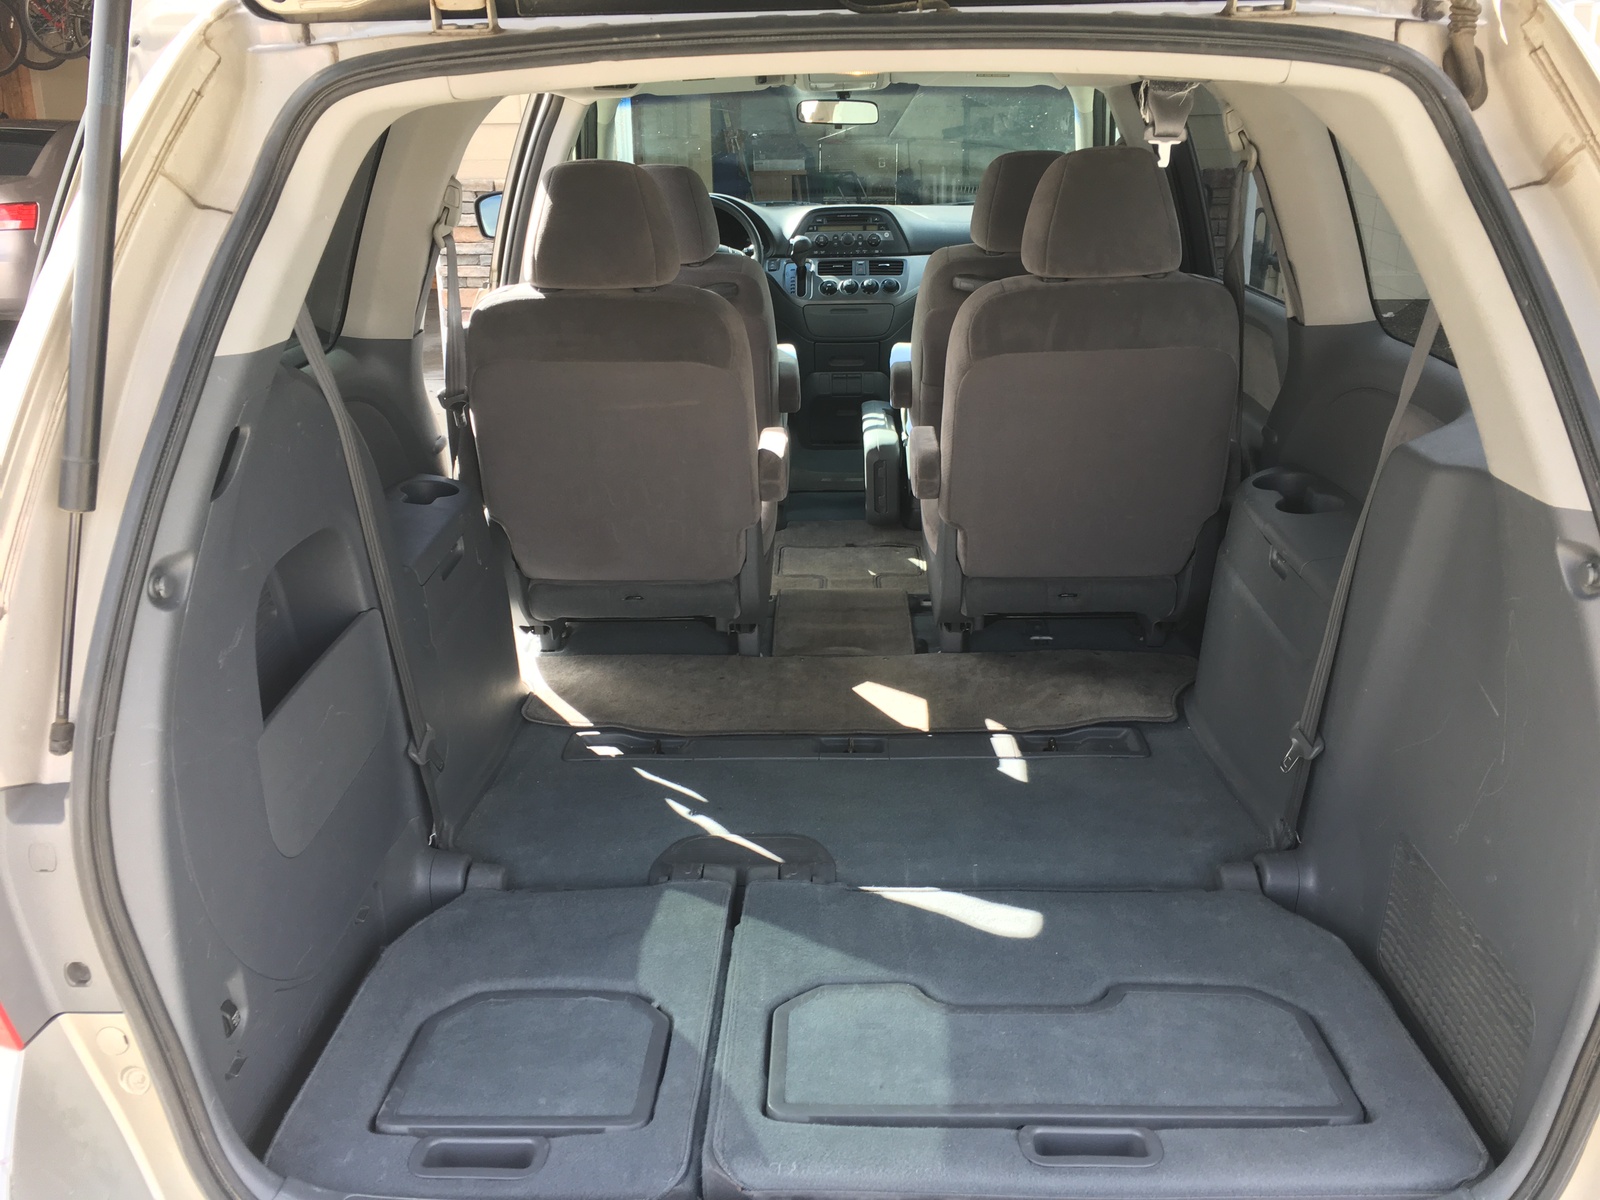 2006 Honda Odyssey: Prices, Reviews & Pictures - CarGurus